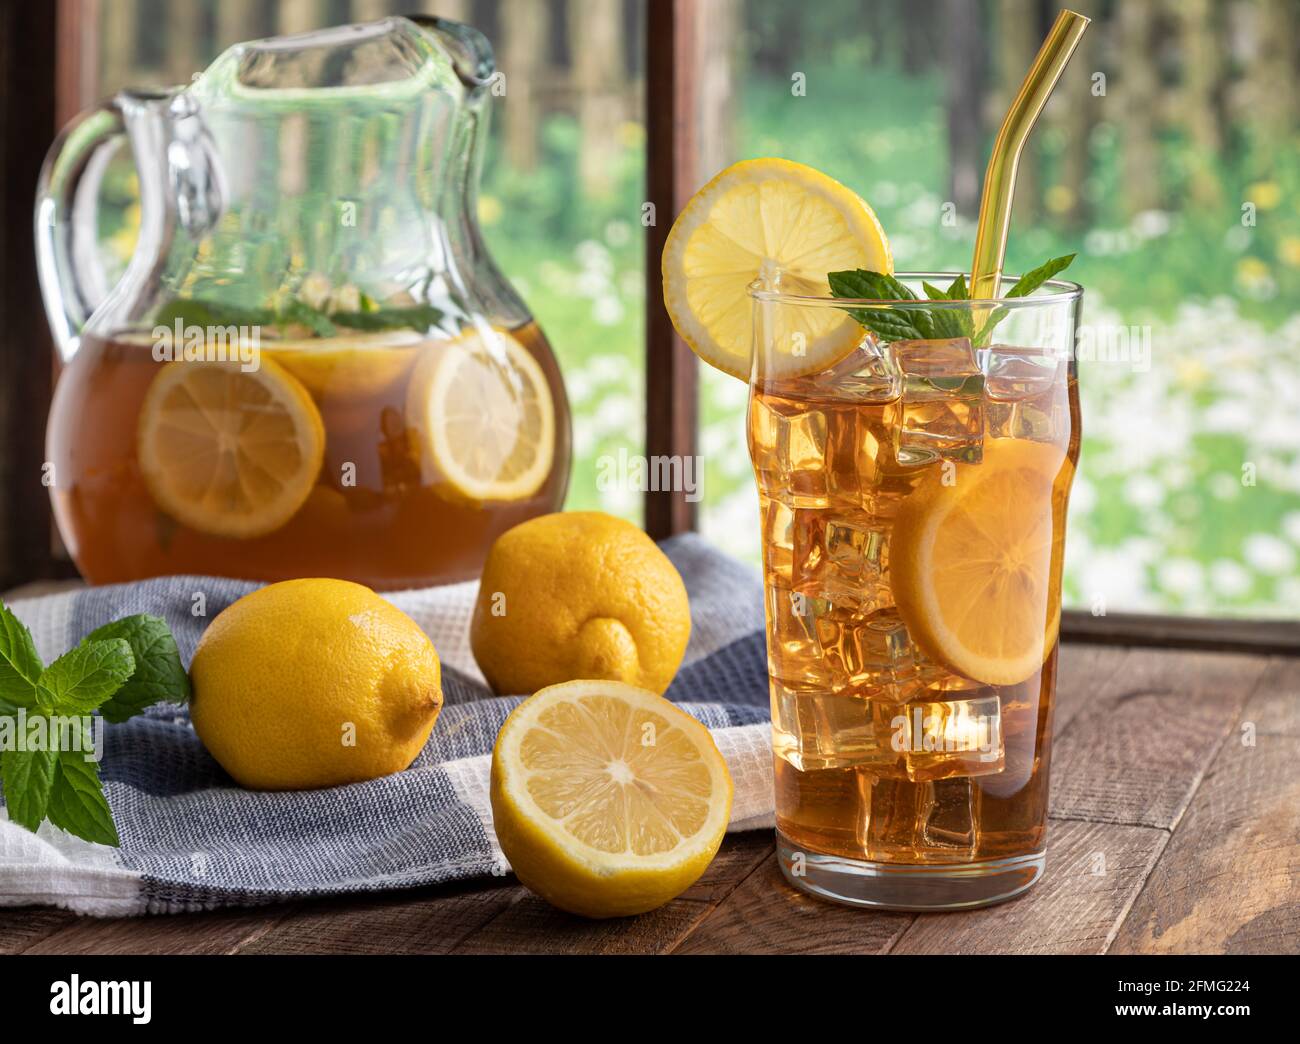 https://c8.alamy.com/comp/2FMG224/glass-of-iced-tea-with-lemon-and-mint-on-a-wooden-table-by-a-window-2FMG224.jpg